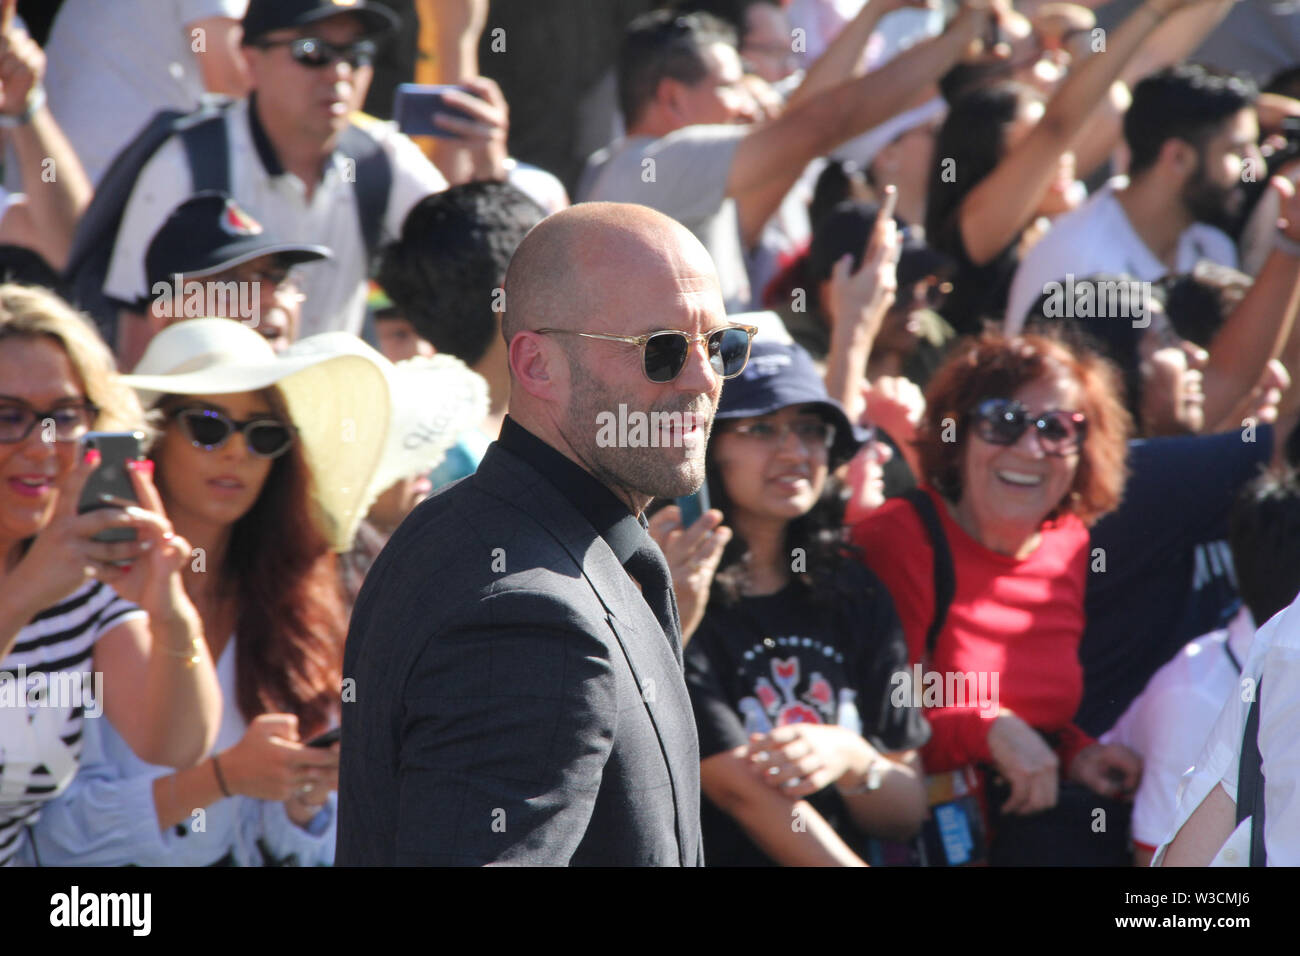 Los Angeles, USA. 13th July, 2019. Jason Statham 07/13/2019 The world premiere of "Fast & Furious Presents: Hobbs & Shaw" held at the Dolby Theatre in Los Angeles, CA Credit: Cronos/Alamy Live News Stock Photo